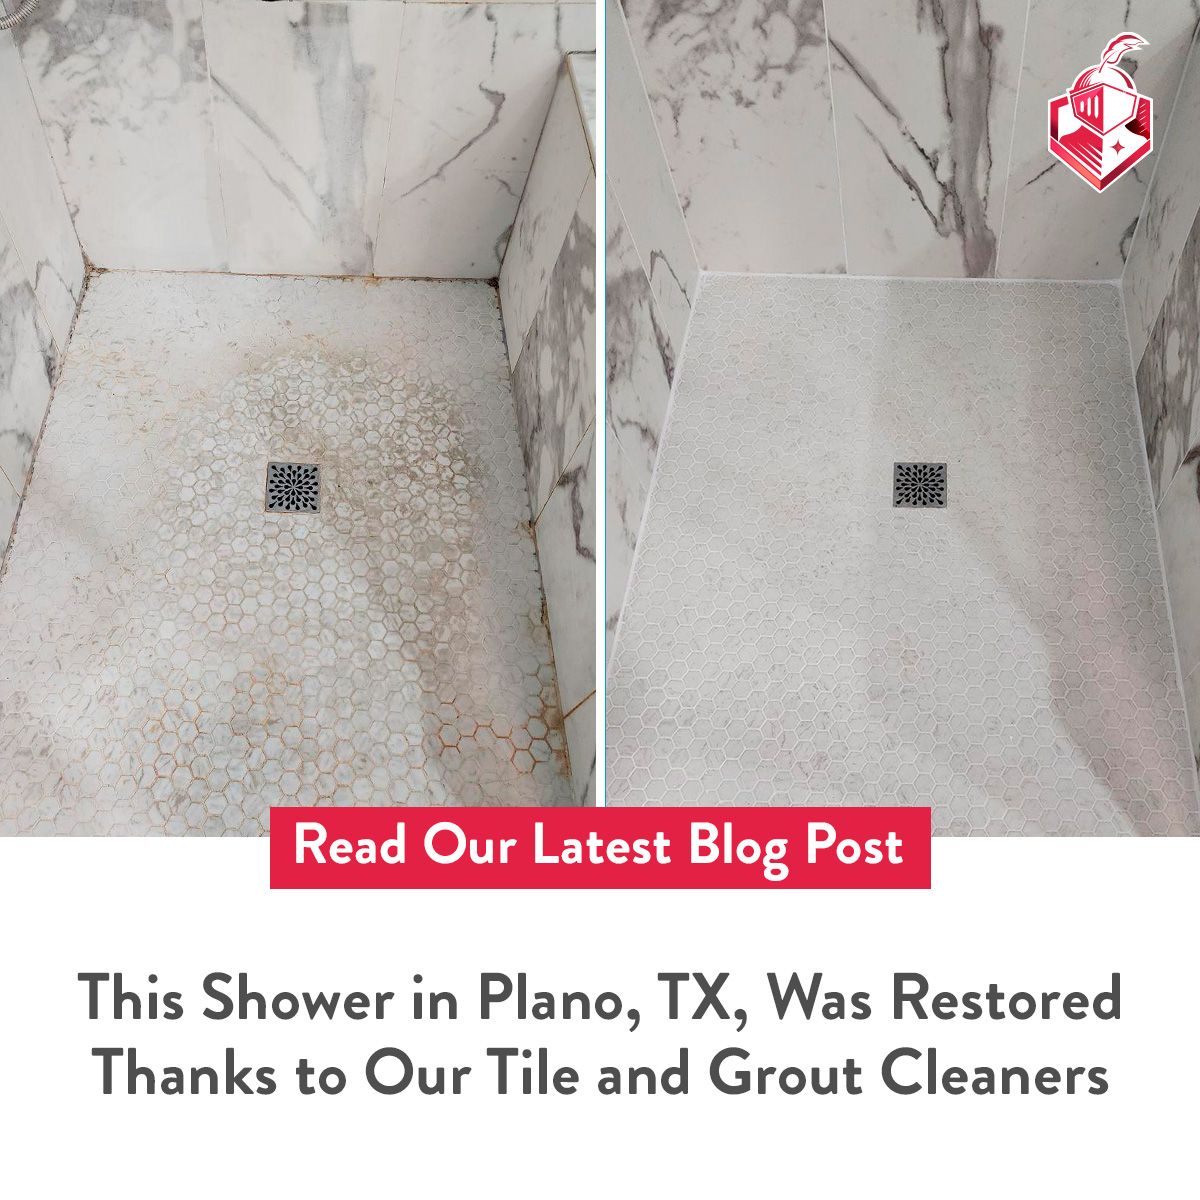 This shower in Plano, TX, was restored thanks to our tile and grout cleaners.